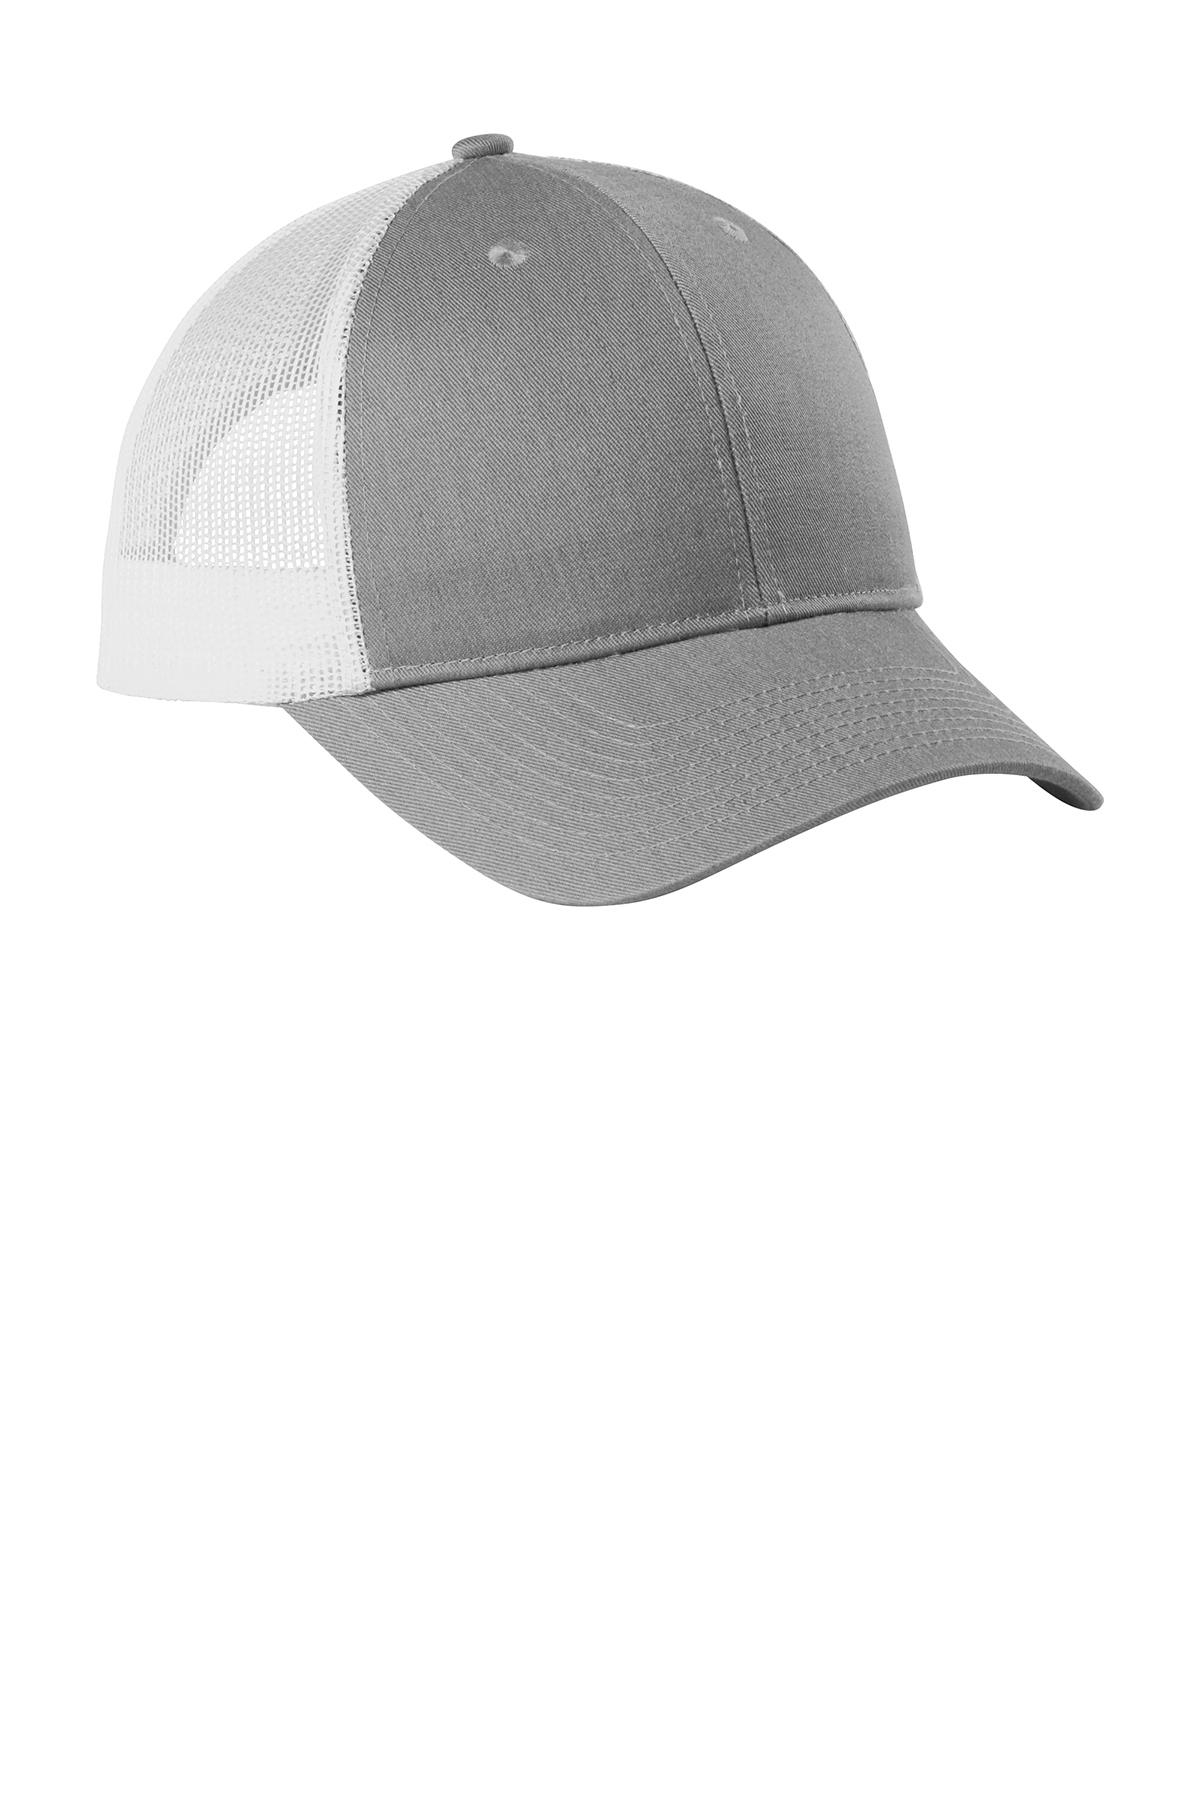 click to view Heather Grey/ White